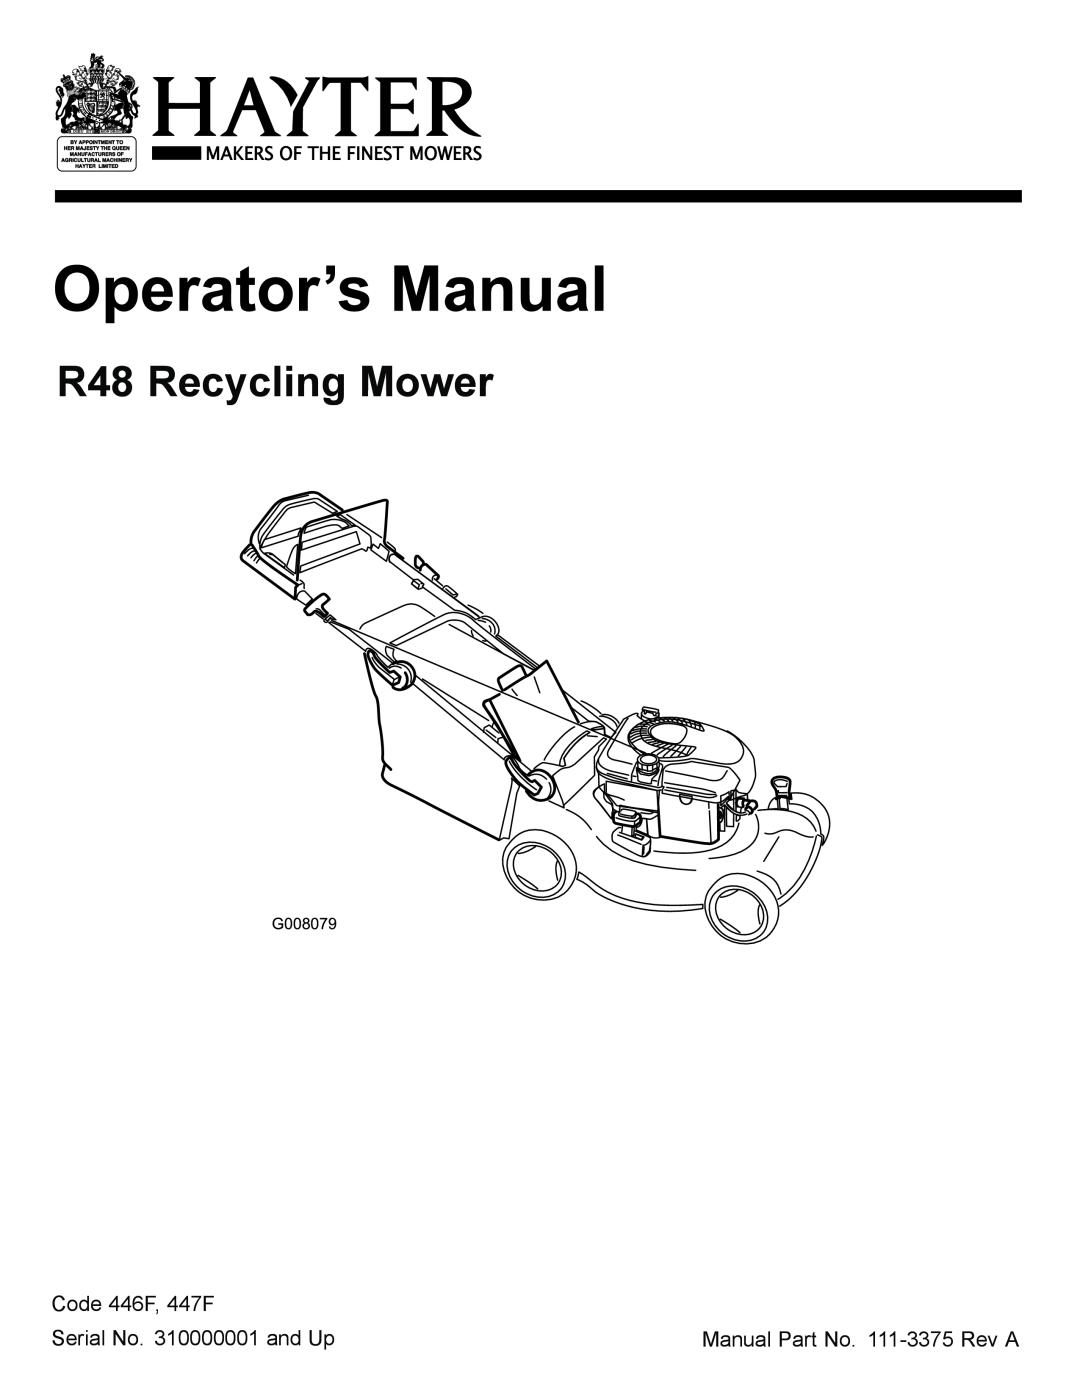 Hayter Mowers manual R48 Recycling Mower, Code 446F, 447F, Serial No. 310000001 and Up, Manual Part No. 111-3375Rev A 